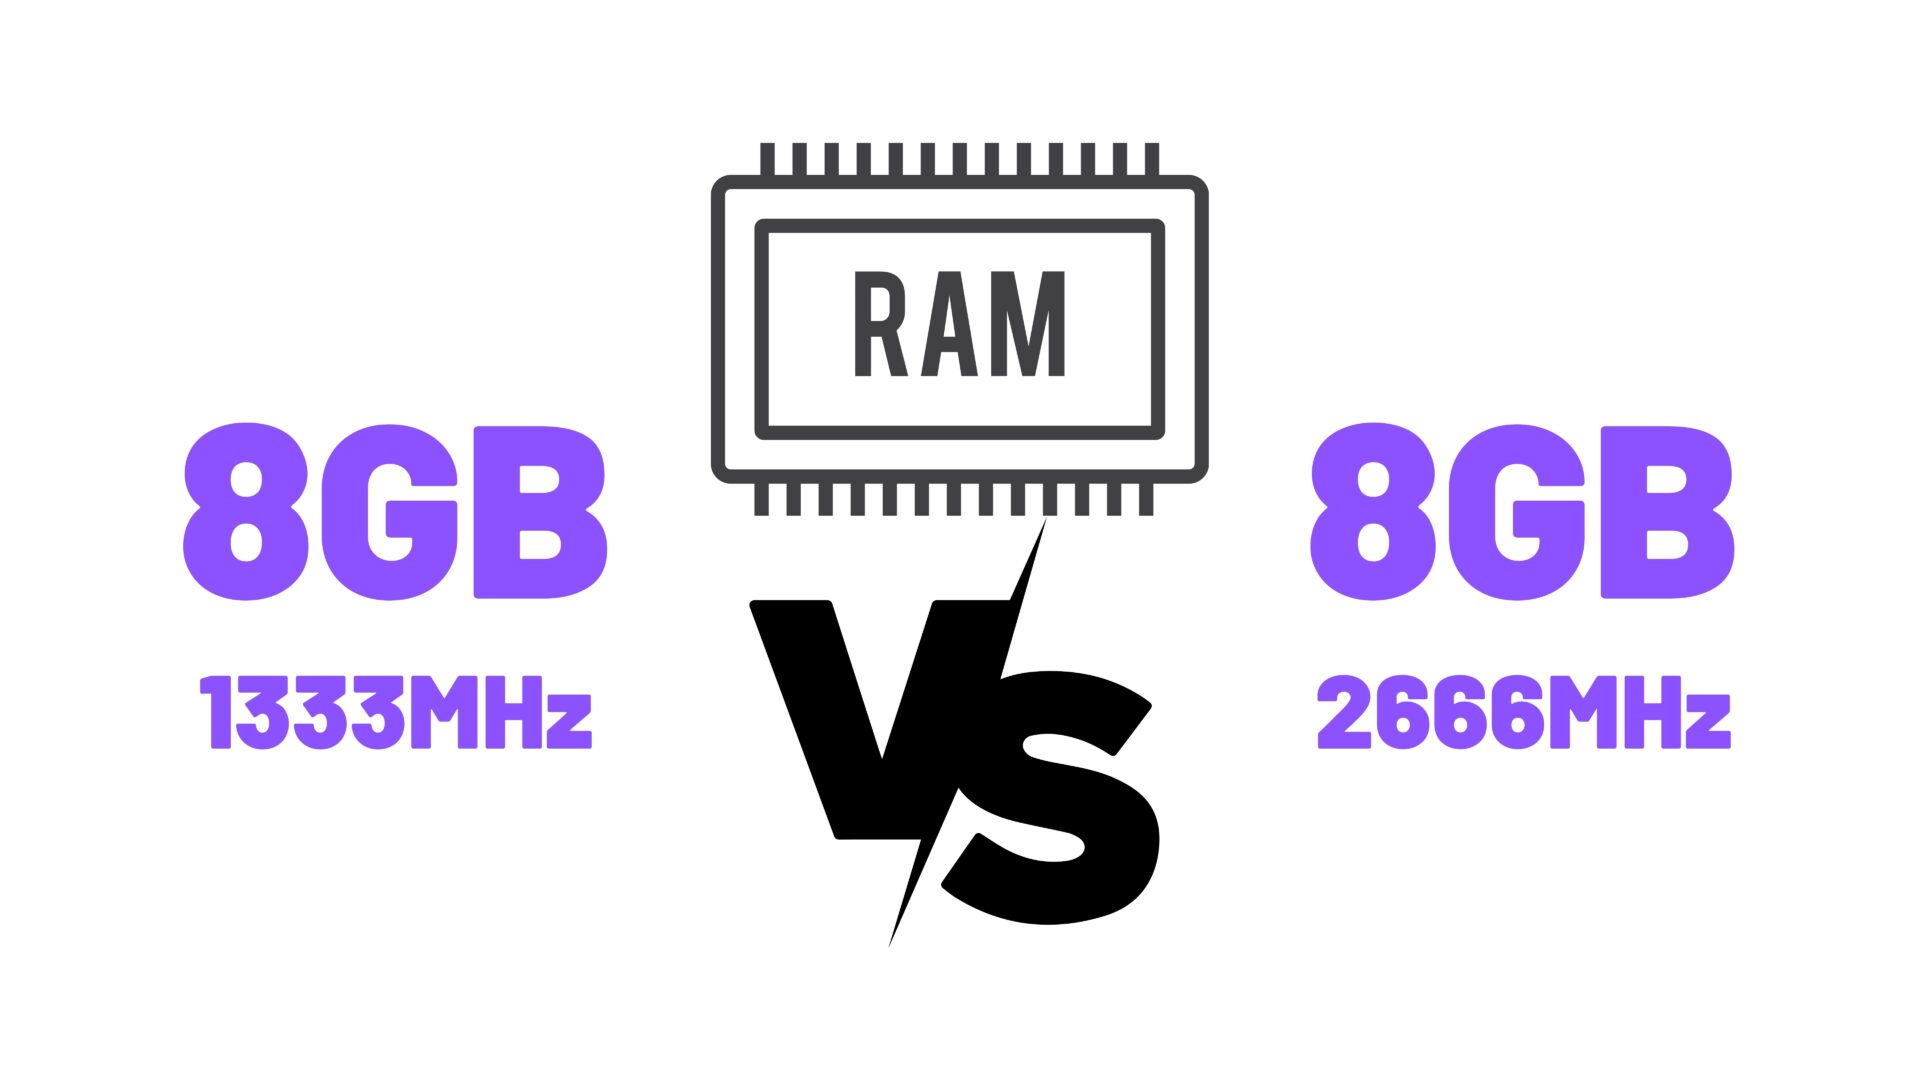 RAM Frequency is Shared by Manufacturers